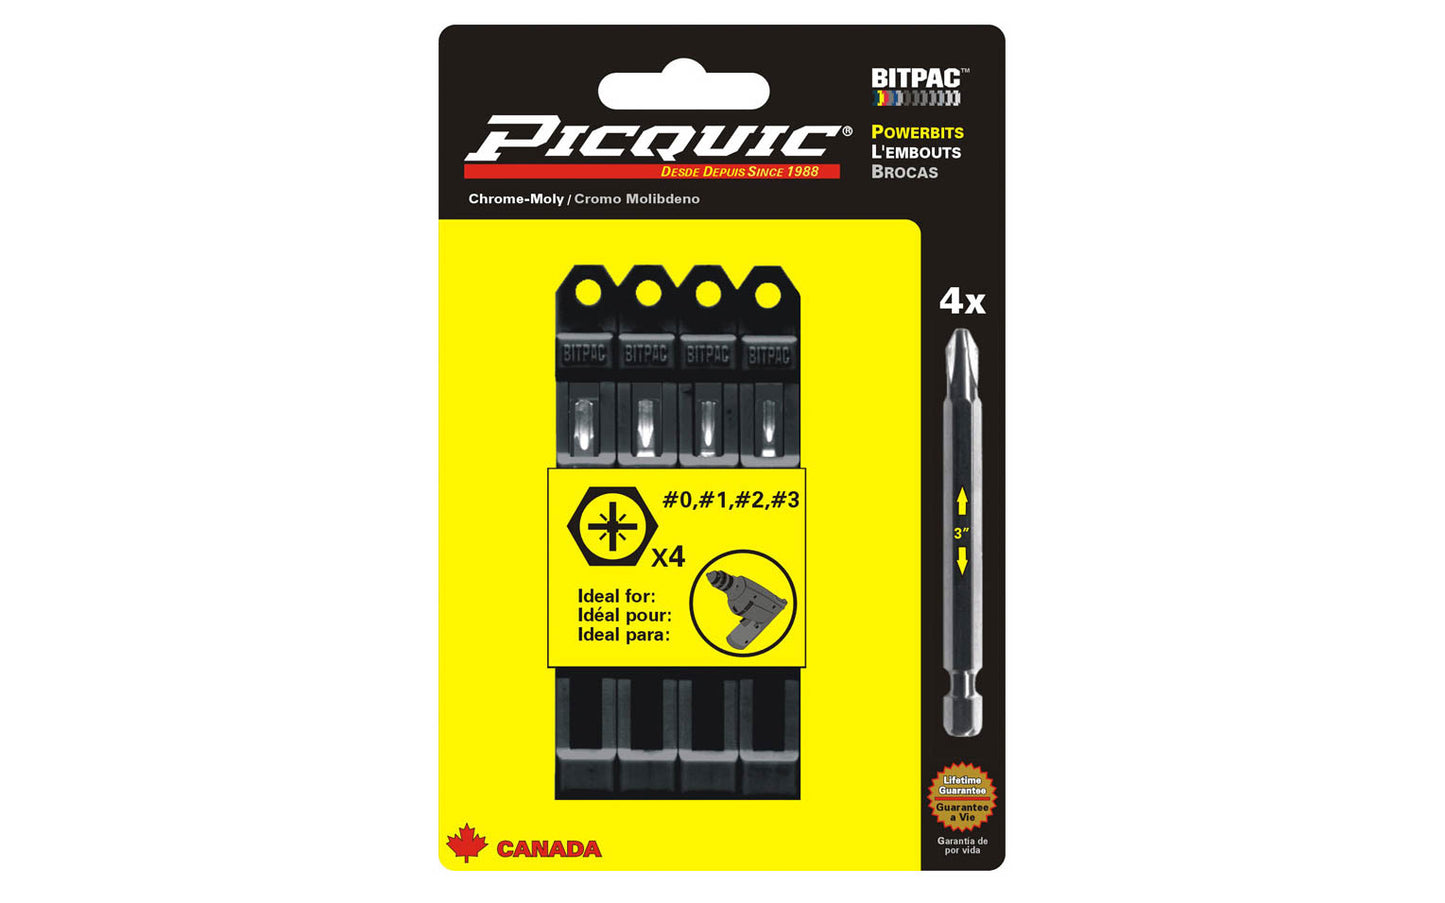 Picquic 4-piece Pozidrive Powerbit Set with sizes #0, #1, #2, #3 pozidrive drive bits. Replacement bits for Picquic screwdrivers & also good for use in drills & impact drivers. 1/4” hex ball power shank. 057369950071